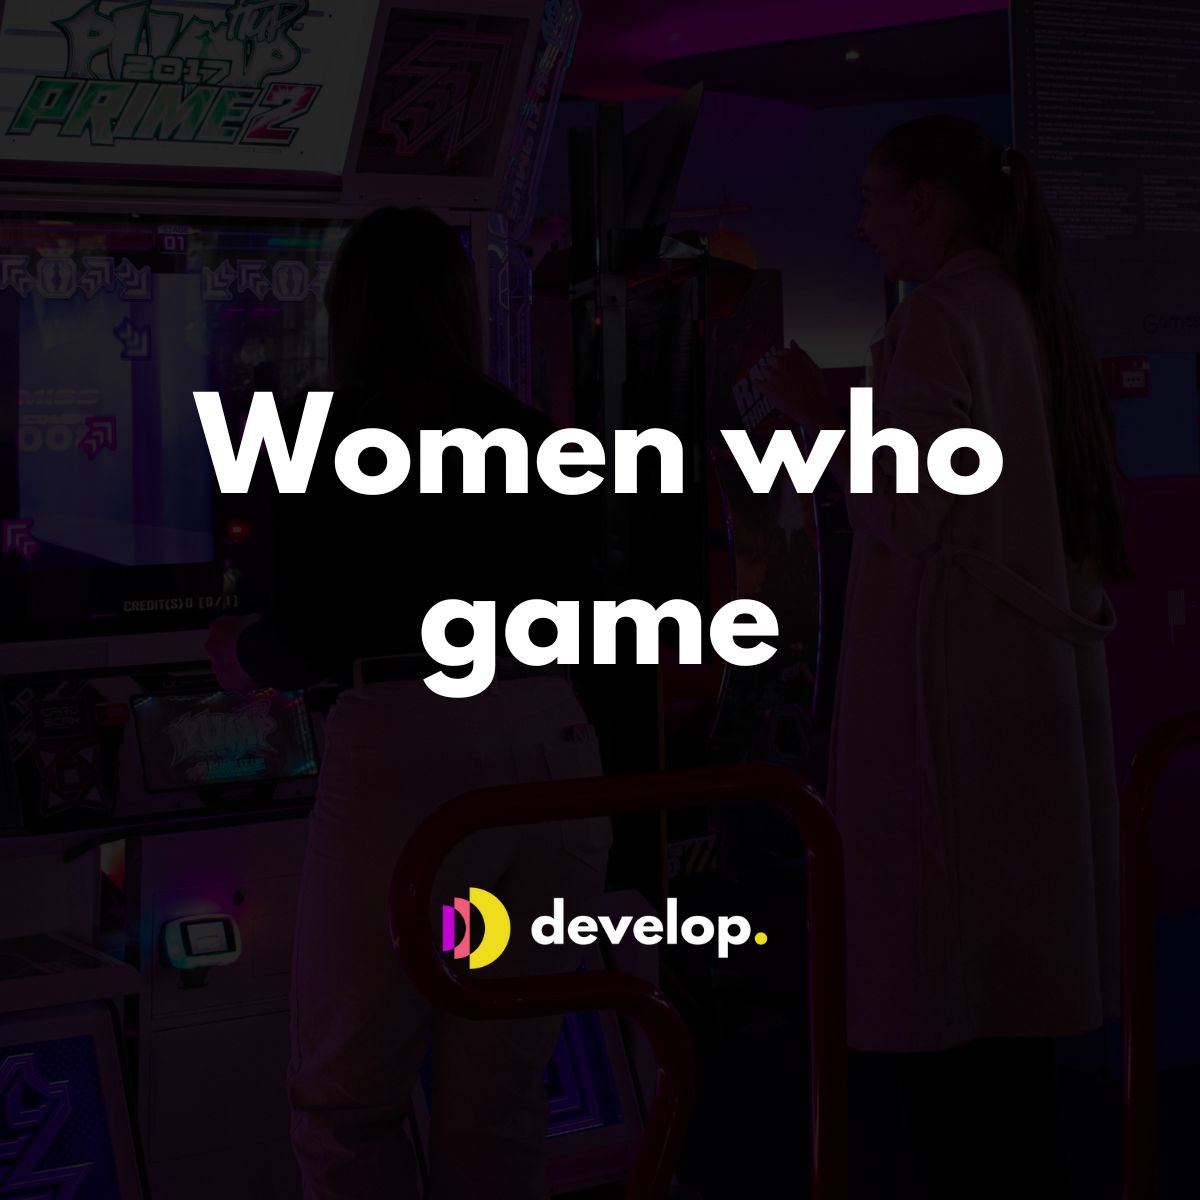 Get a glimpse into the dynamic world of women in gaming! 🎮 Check out our blog for empowering stories from female gamers. buff.ly/44hDUNZ